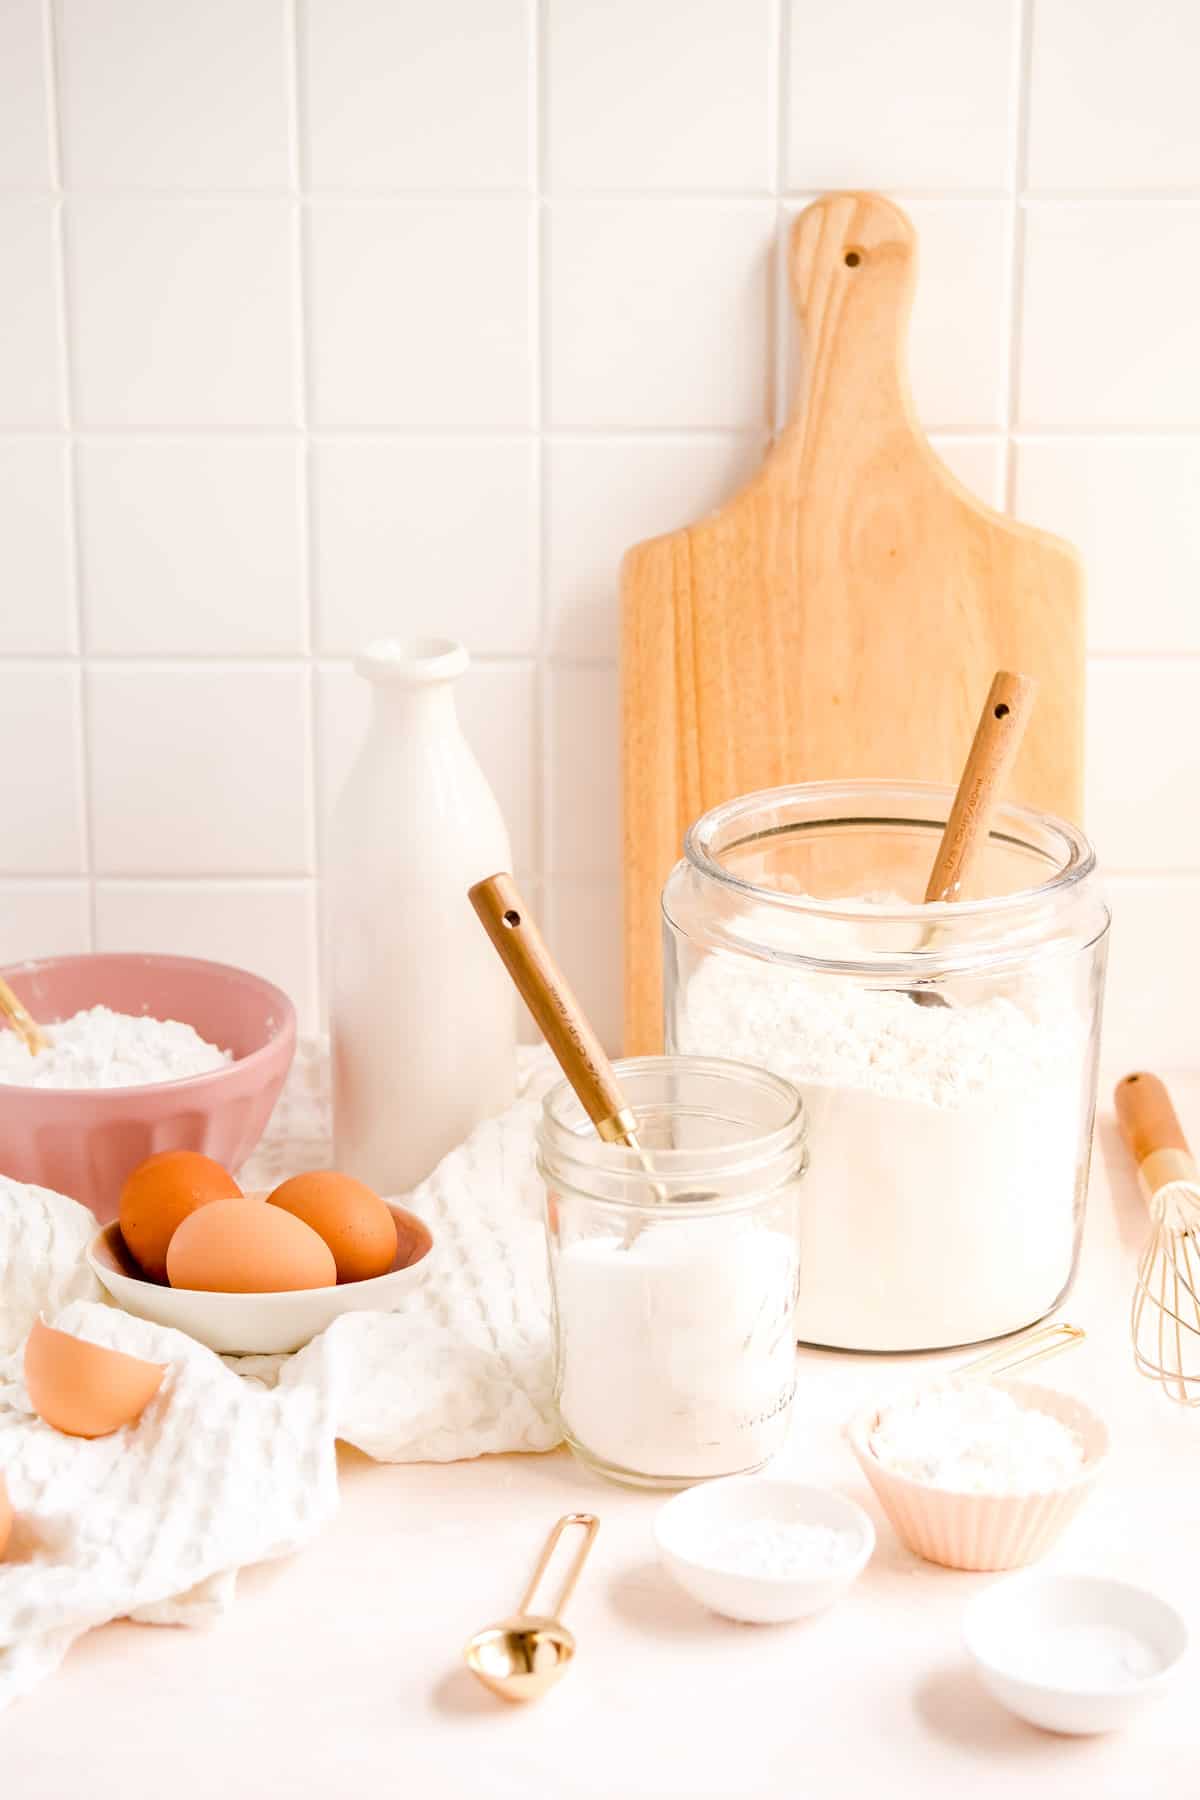 glass jars and bowls of baking ingredients with measuring utensils.